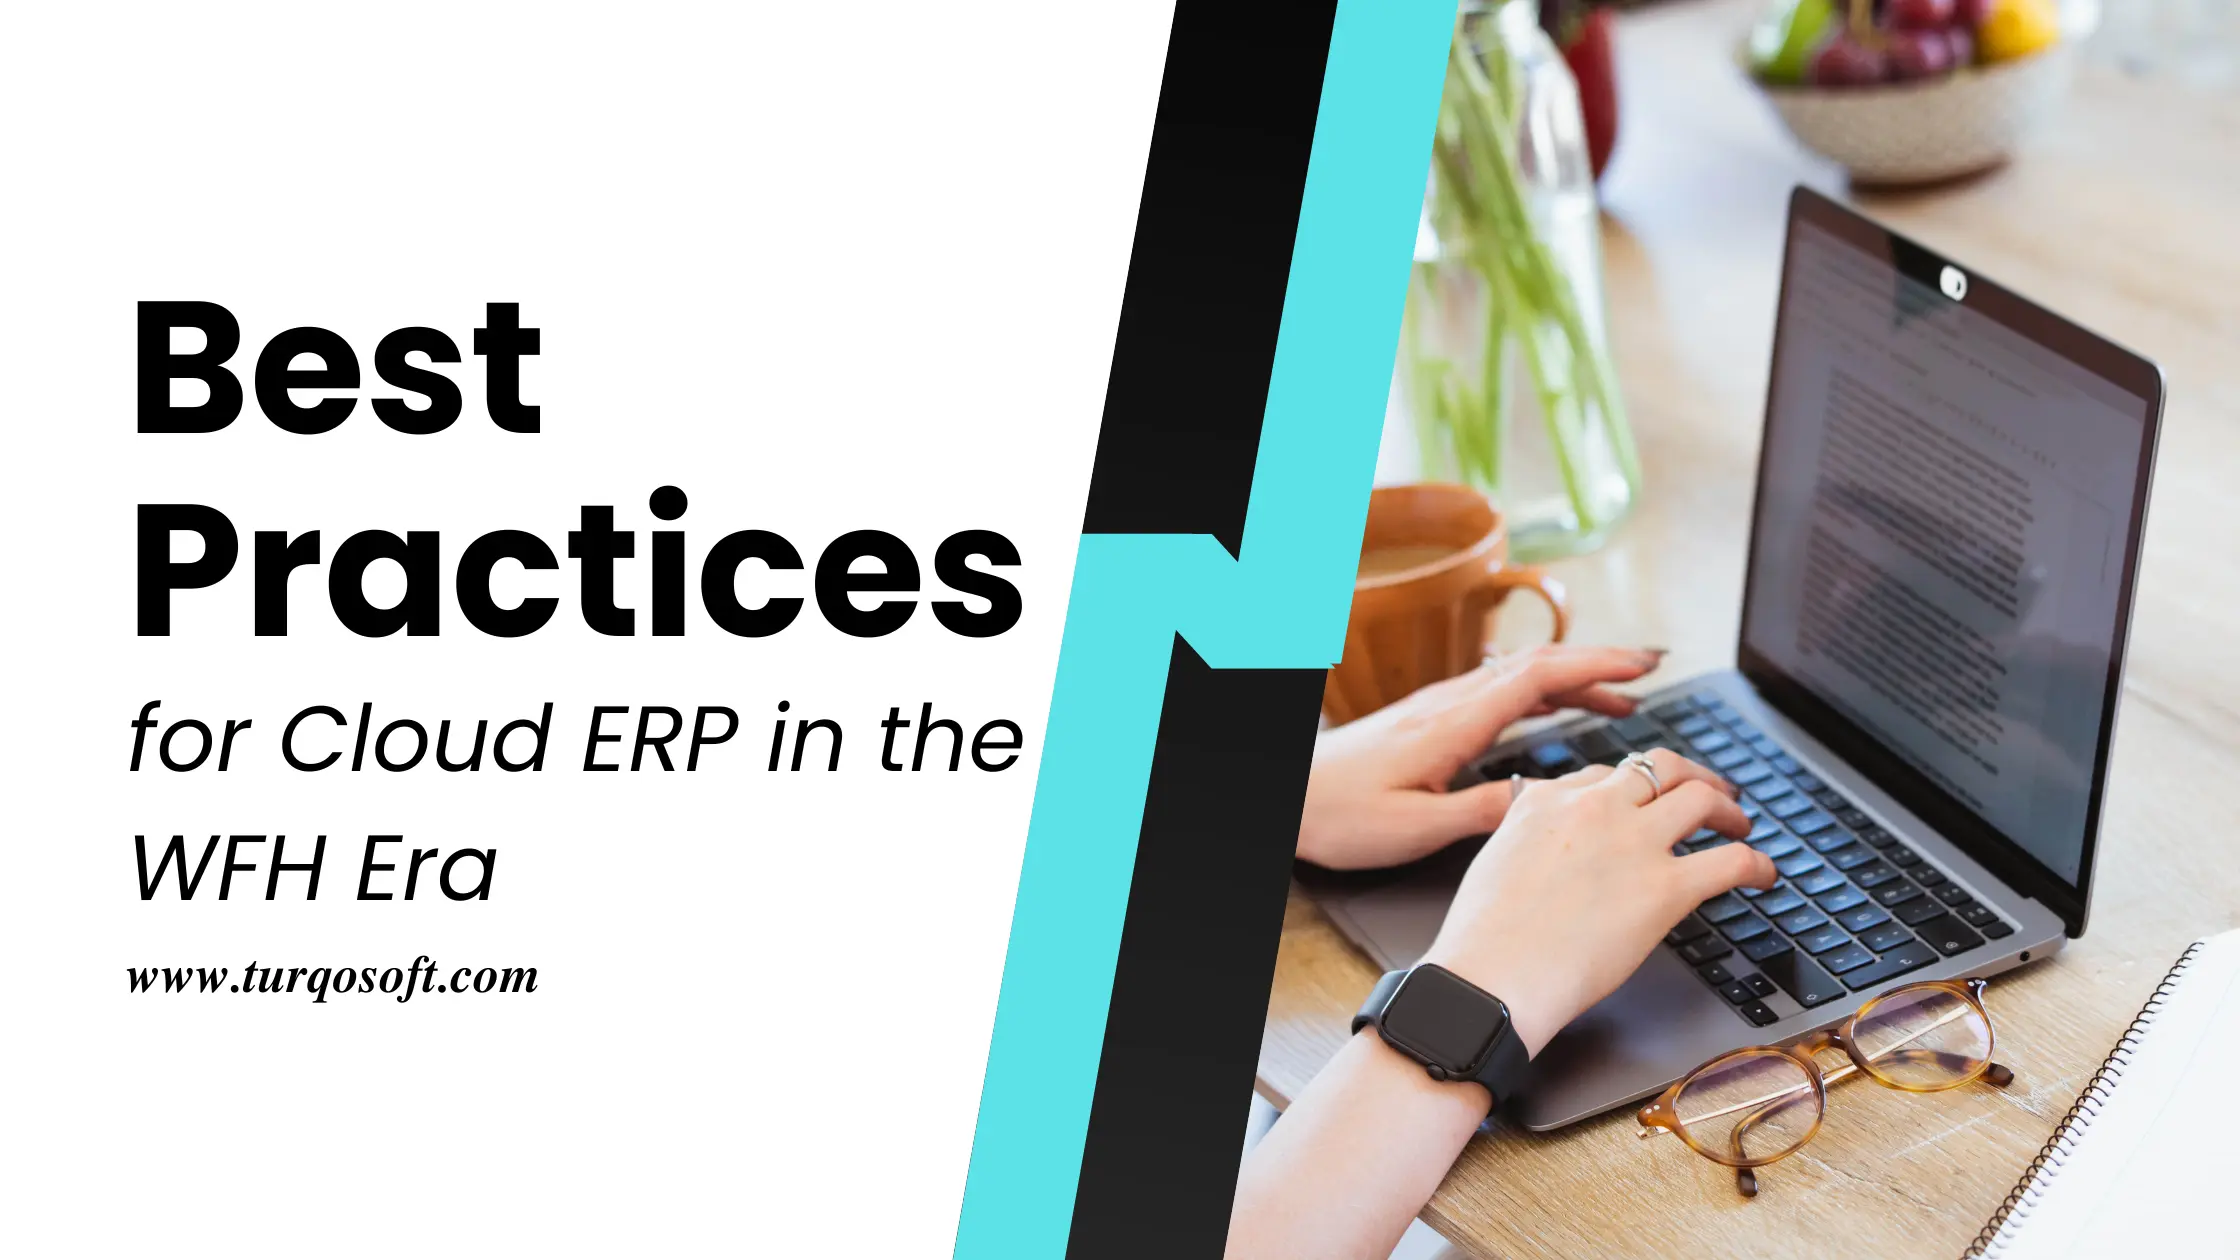 Best Practices for Cloud ERP in the Working from Home Era